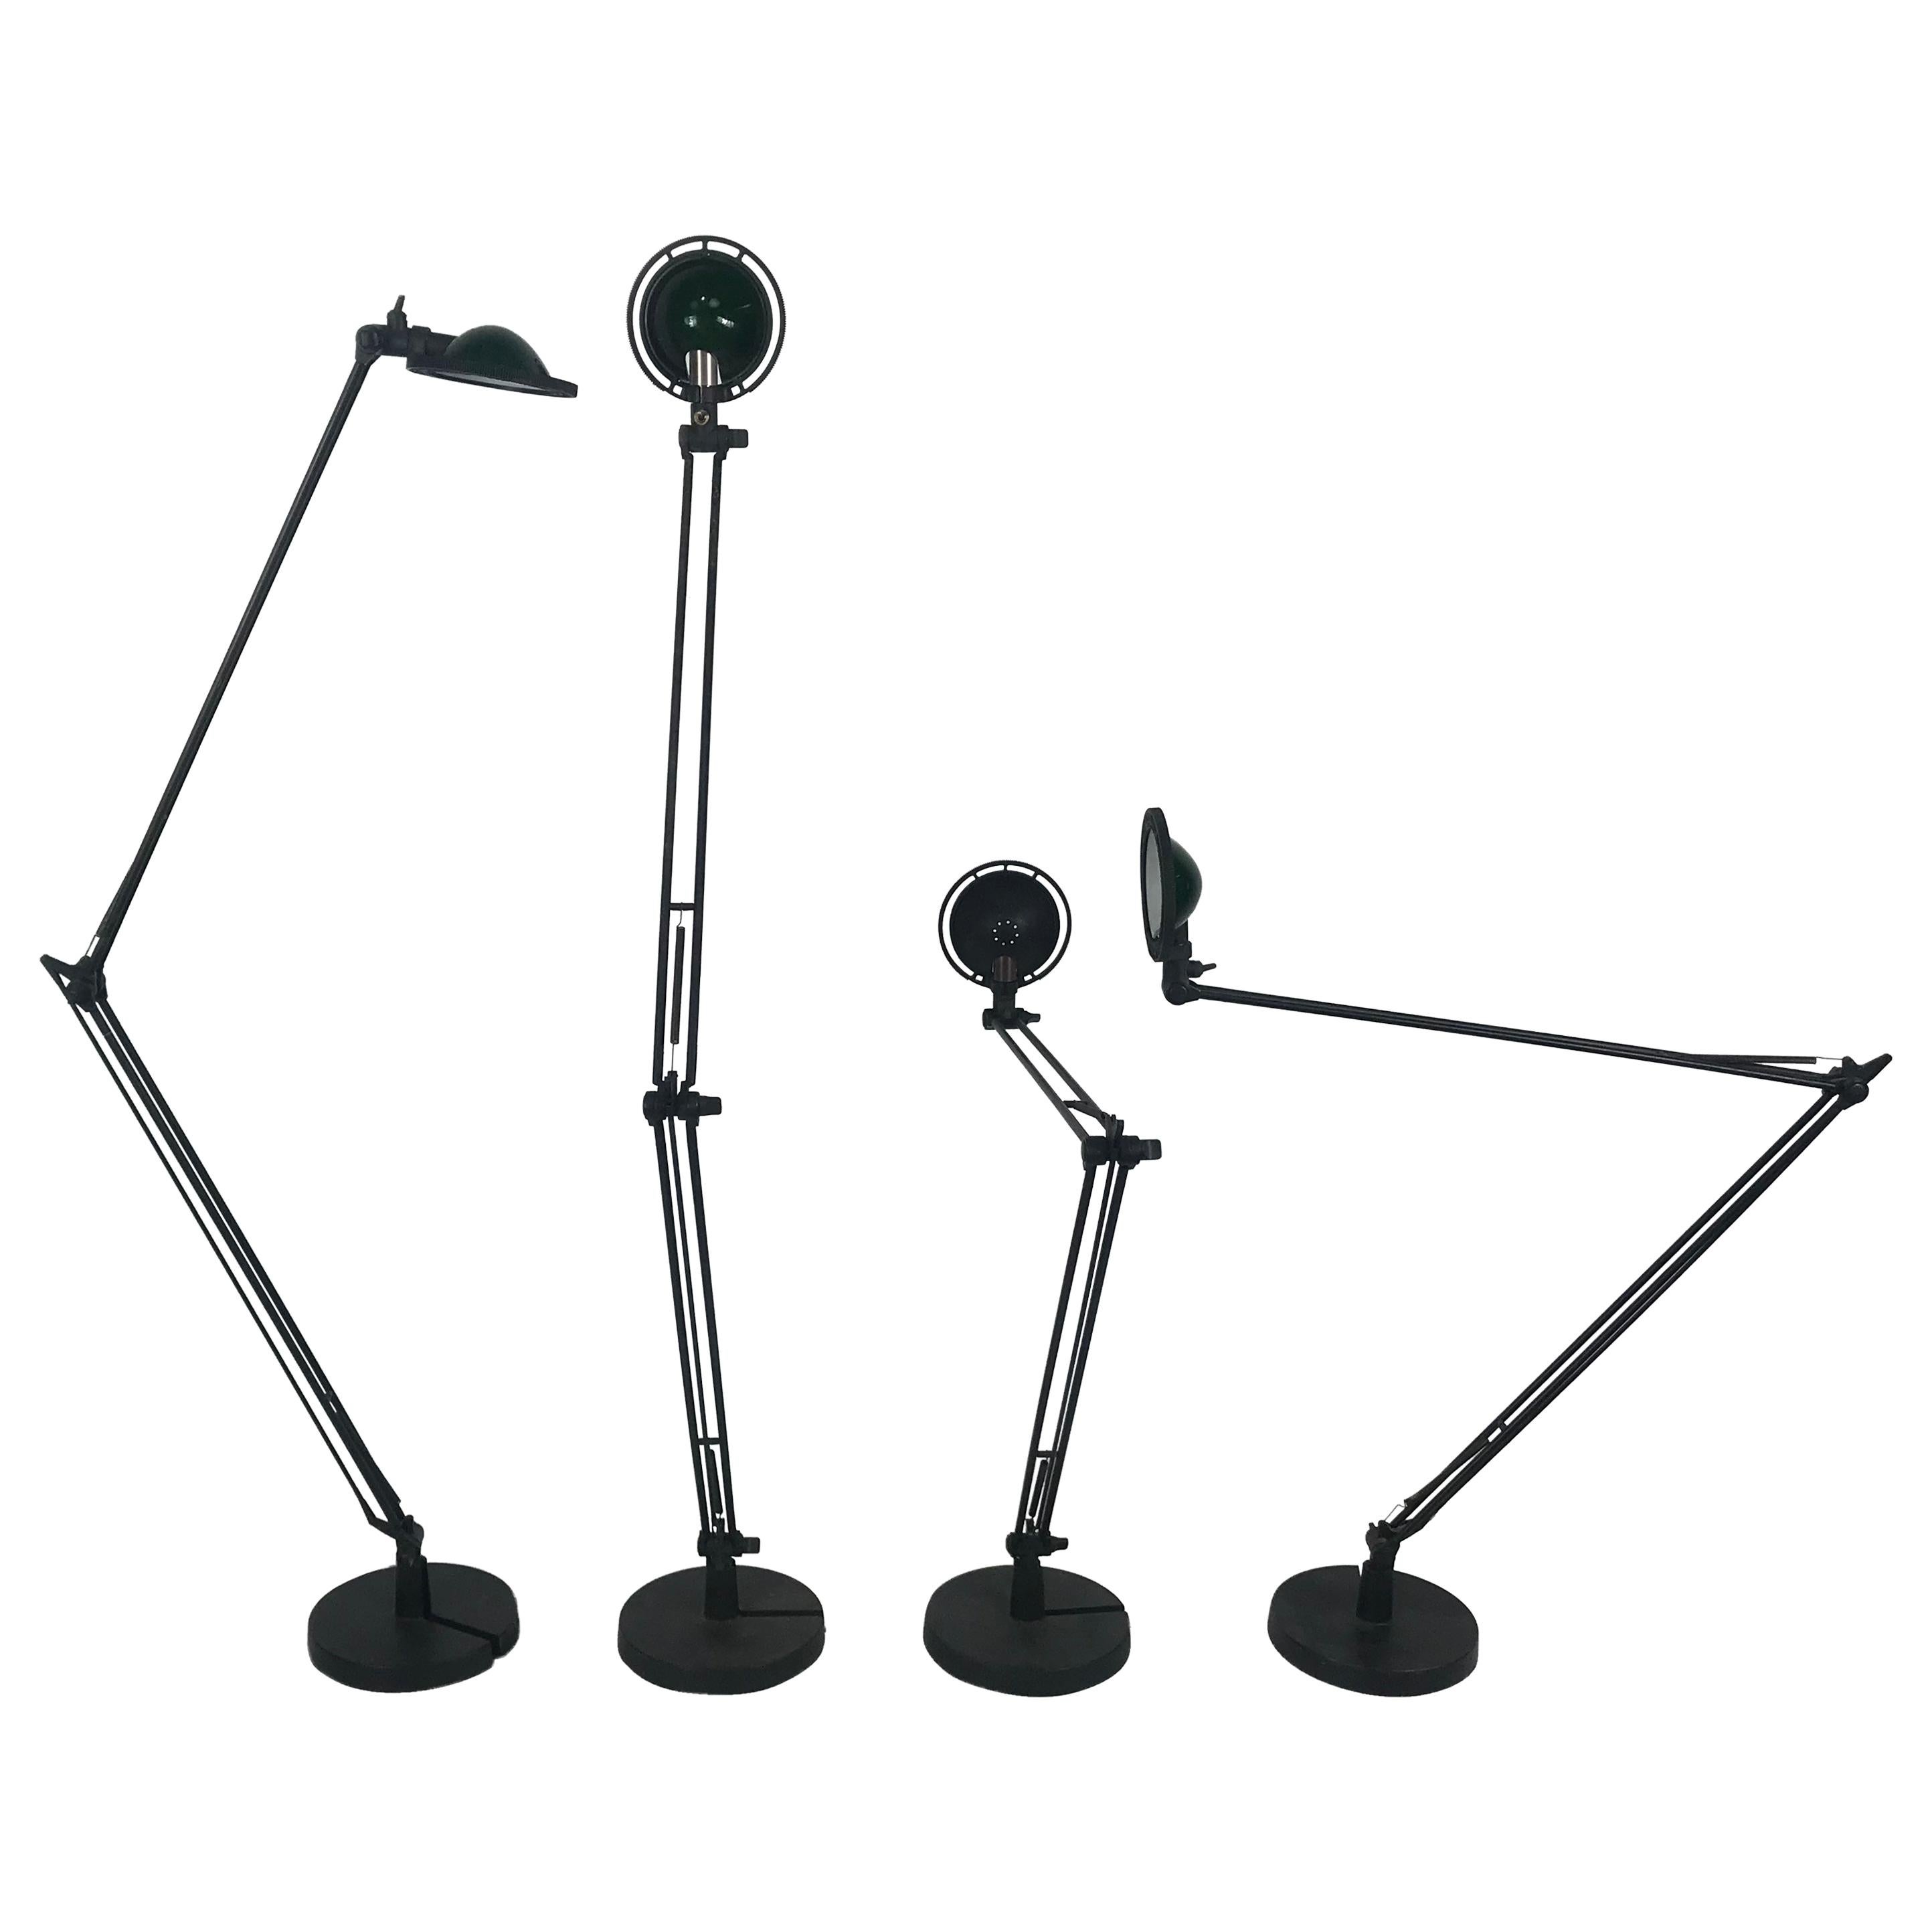 4 Architectural Task Lamps, Berenice D12, Meda Rizzatto for Luceplan, Italy